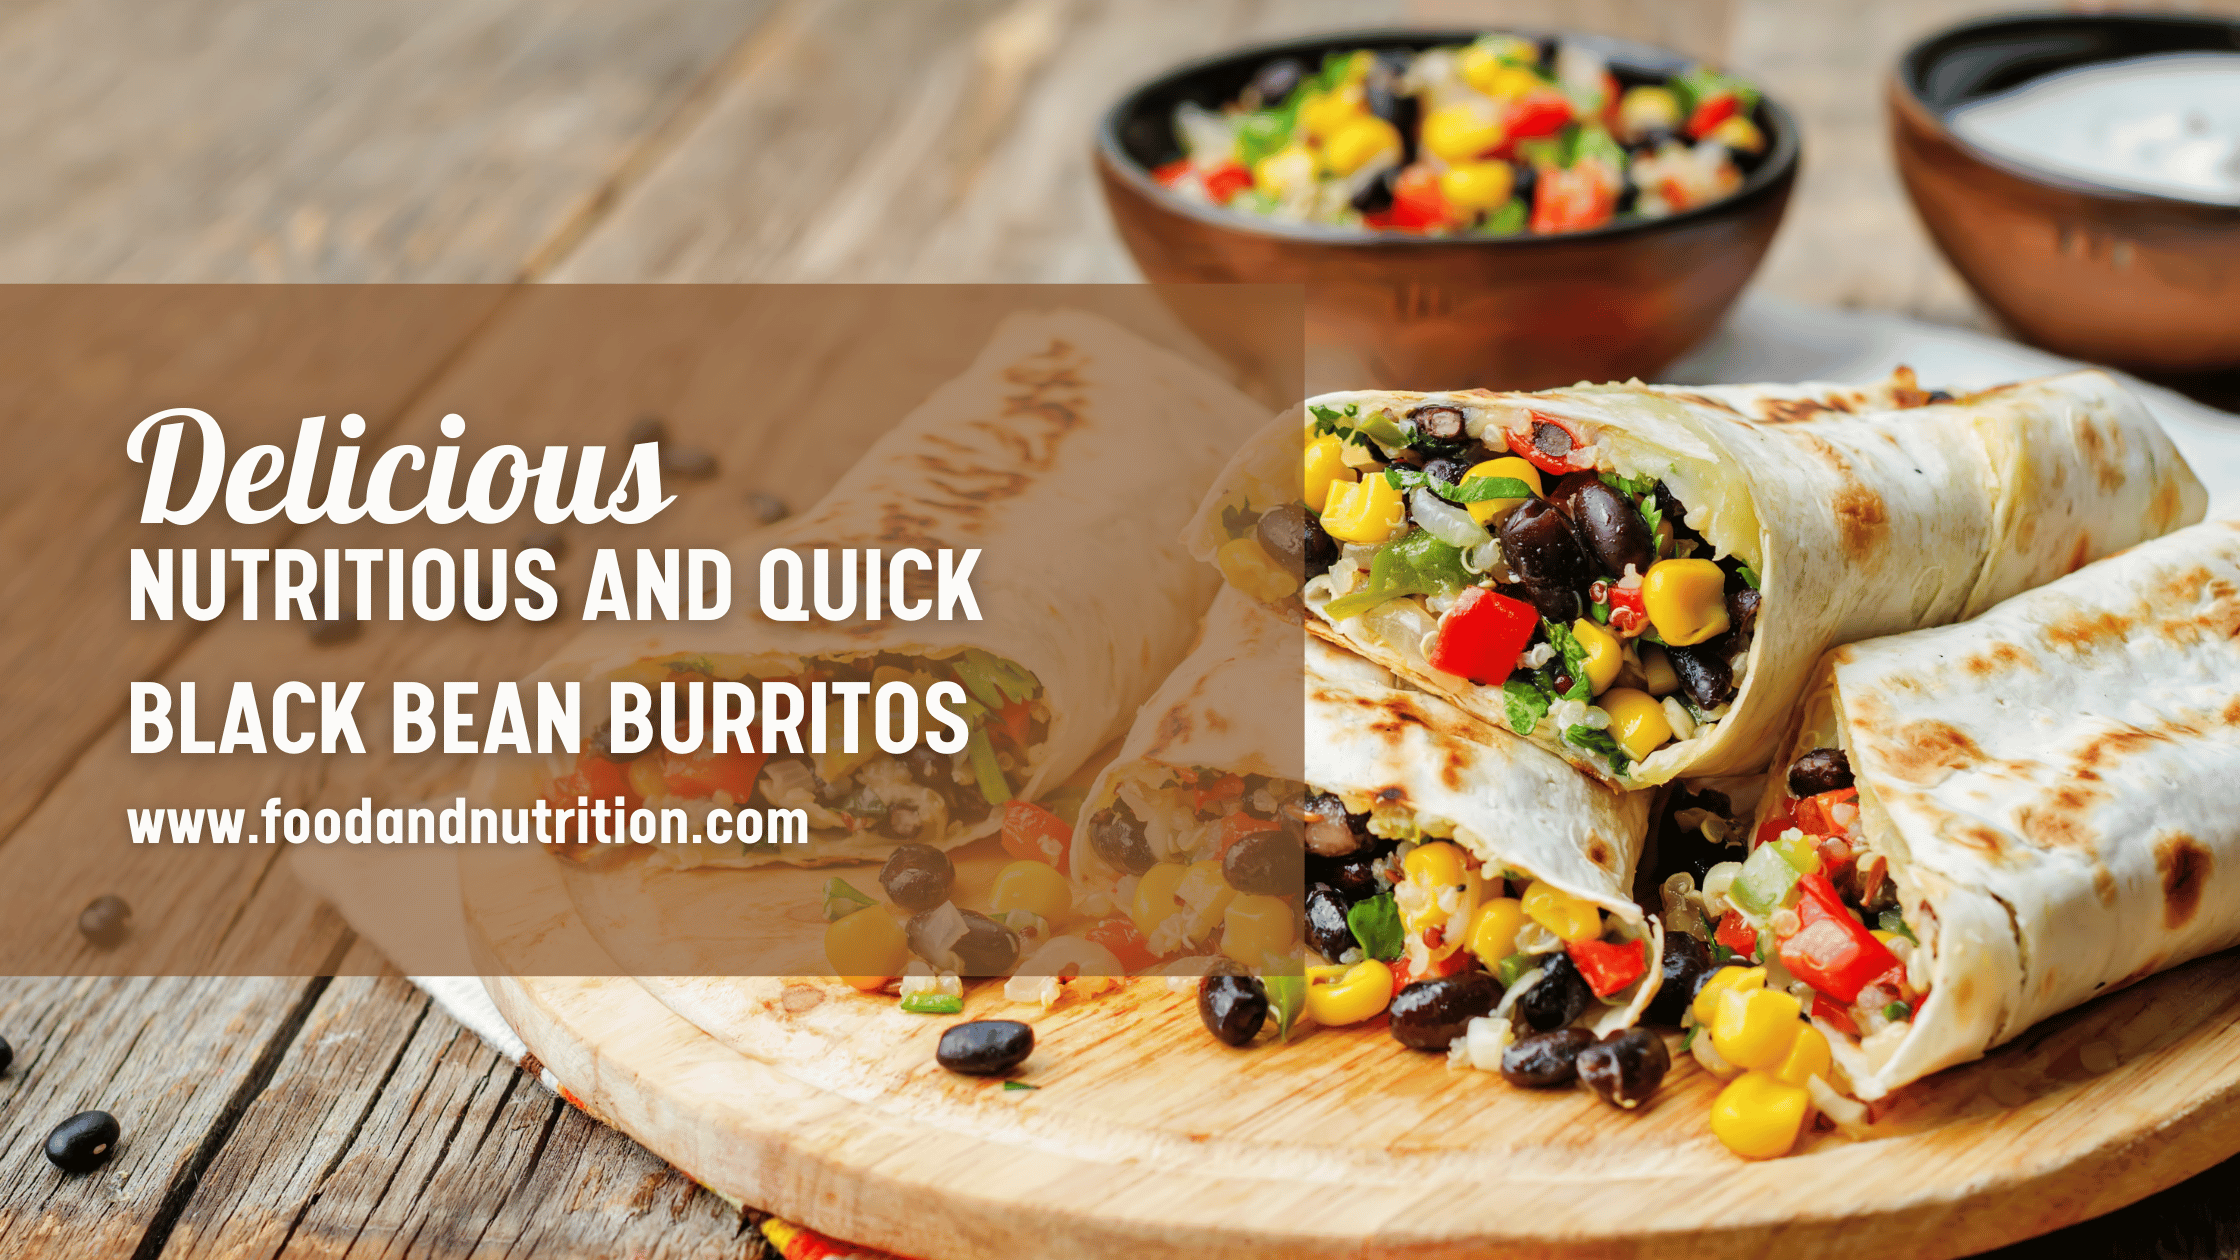 Nutritious and Quick Black Bean Burritos: Try Now!